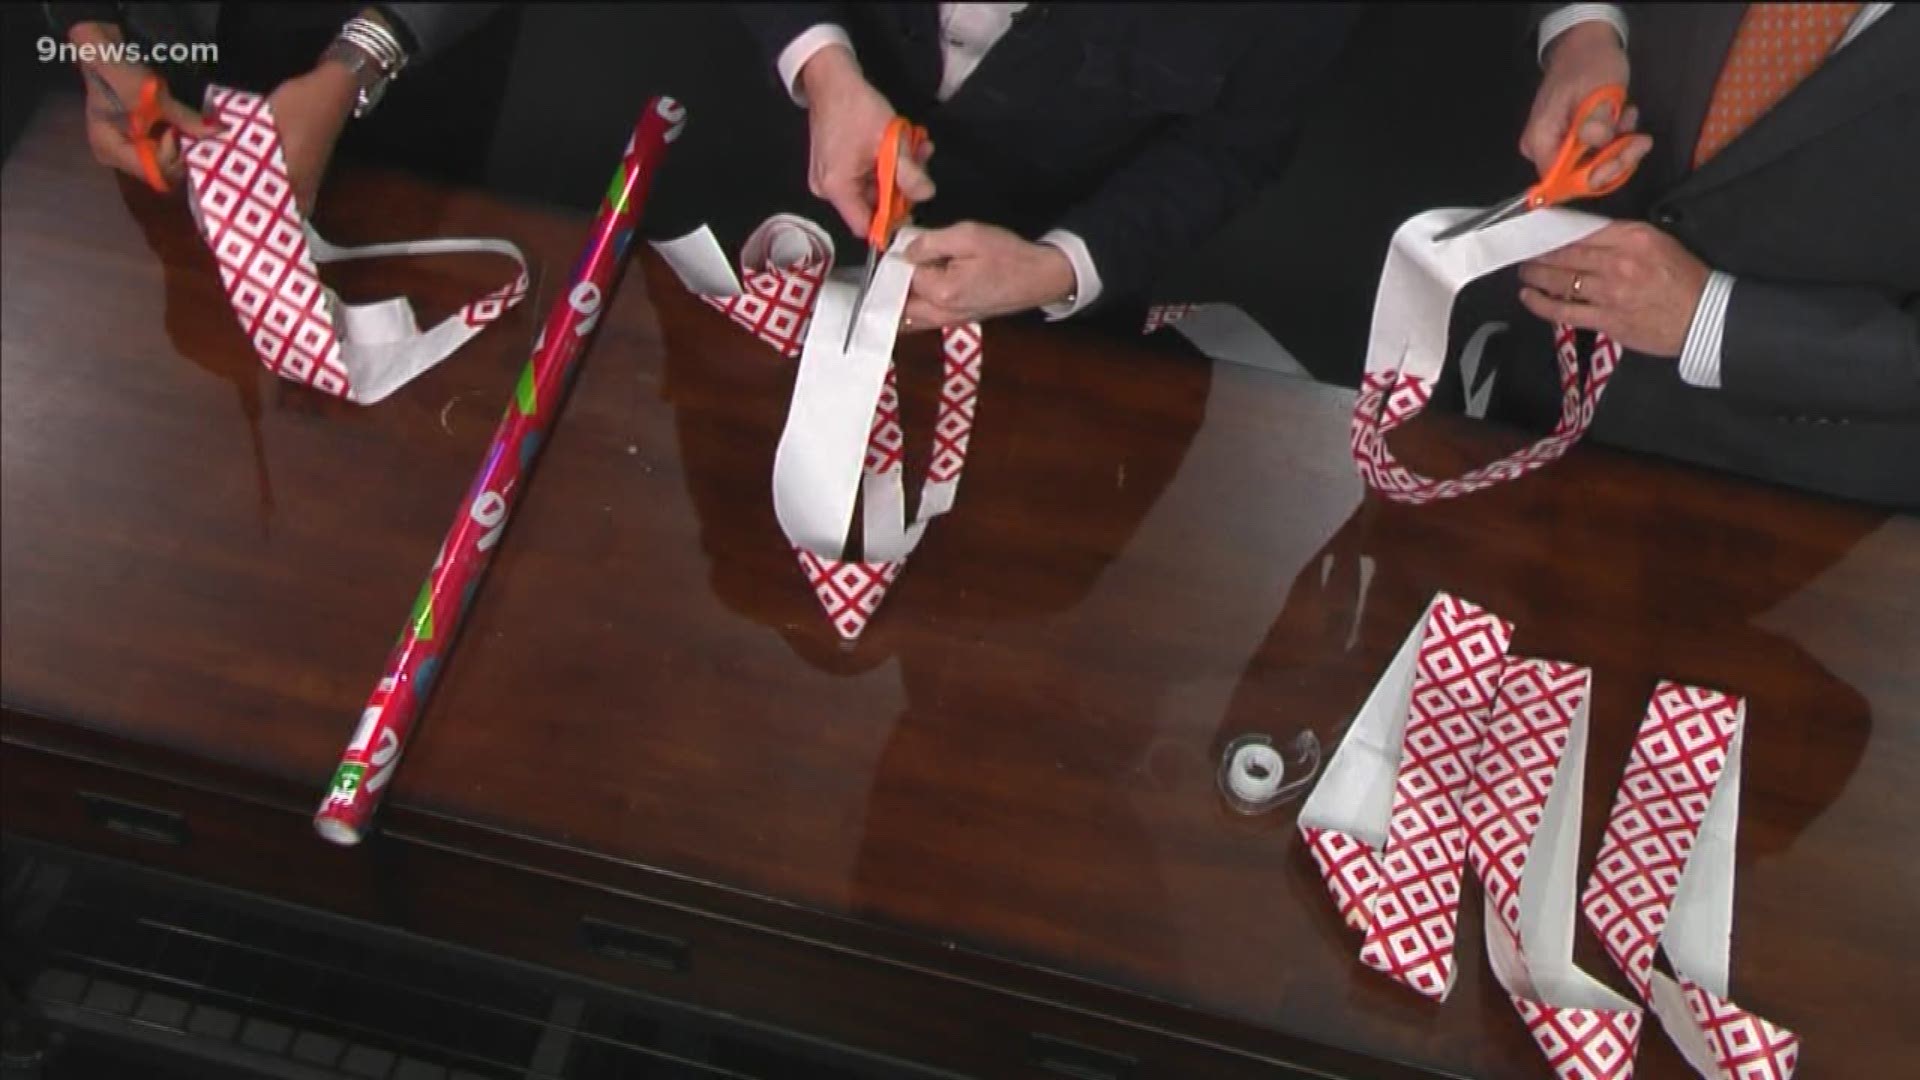 Steve Spangler comes up with a way for you to amaze your guests over the holidays. All you need is a roll of wrapping paper, scissors, and a little science magic!